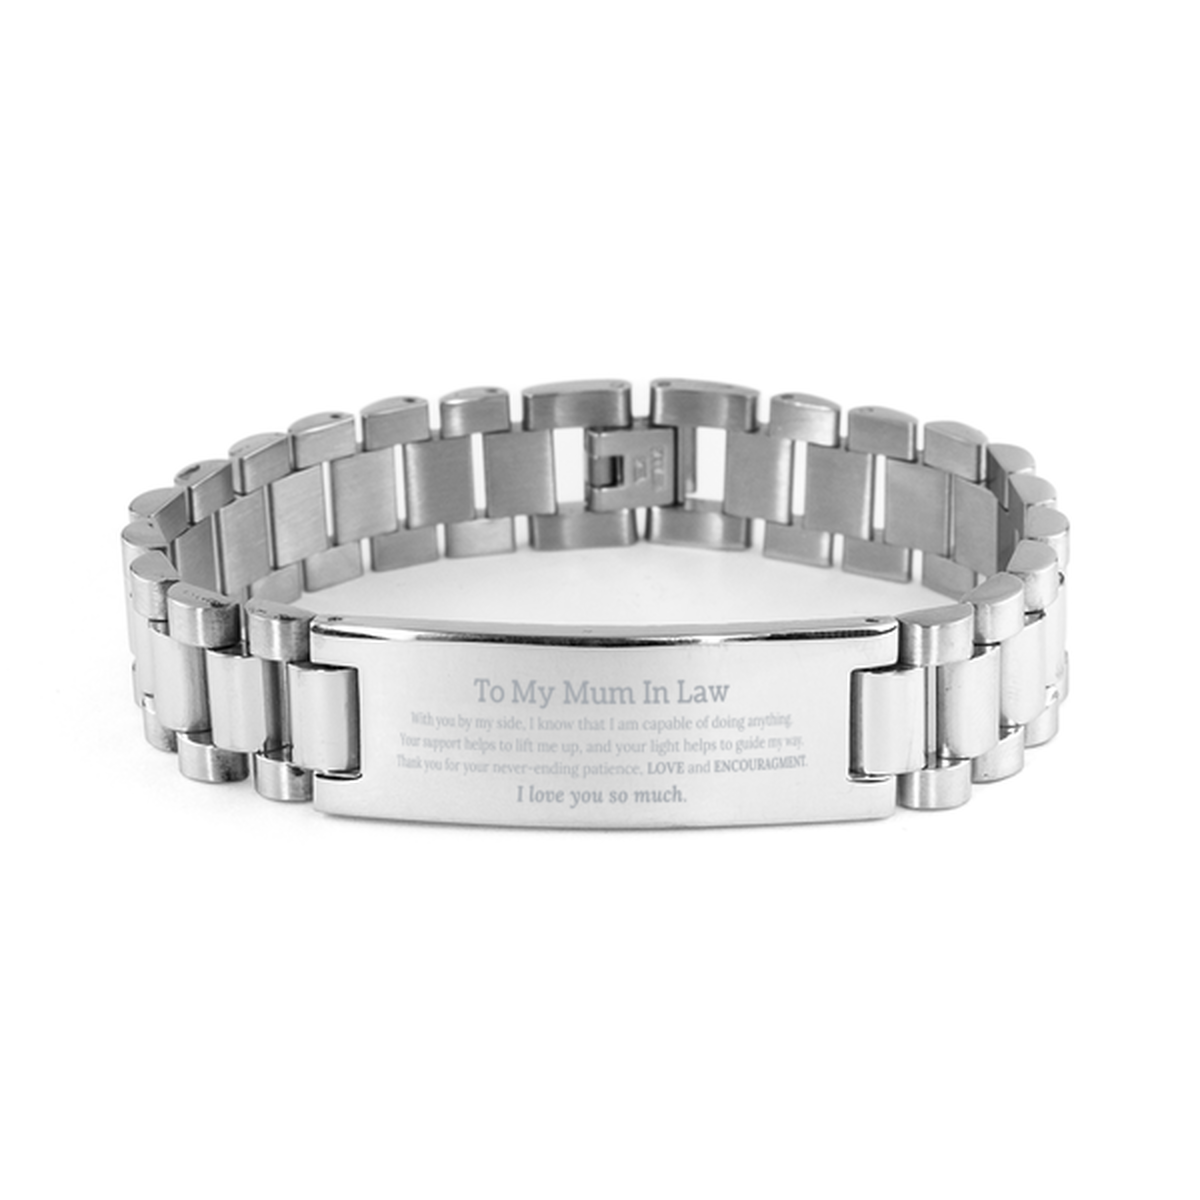 Appreciation Mum In Law  Ladder Stainless Steel Bracelet Gifts, To My Mum In Law  Birthday Christmas Wedding Keepsake Gifts for Mum In Law  With you by my side, I know that I am capable of doing anything. I love you so much